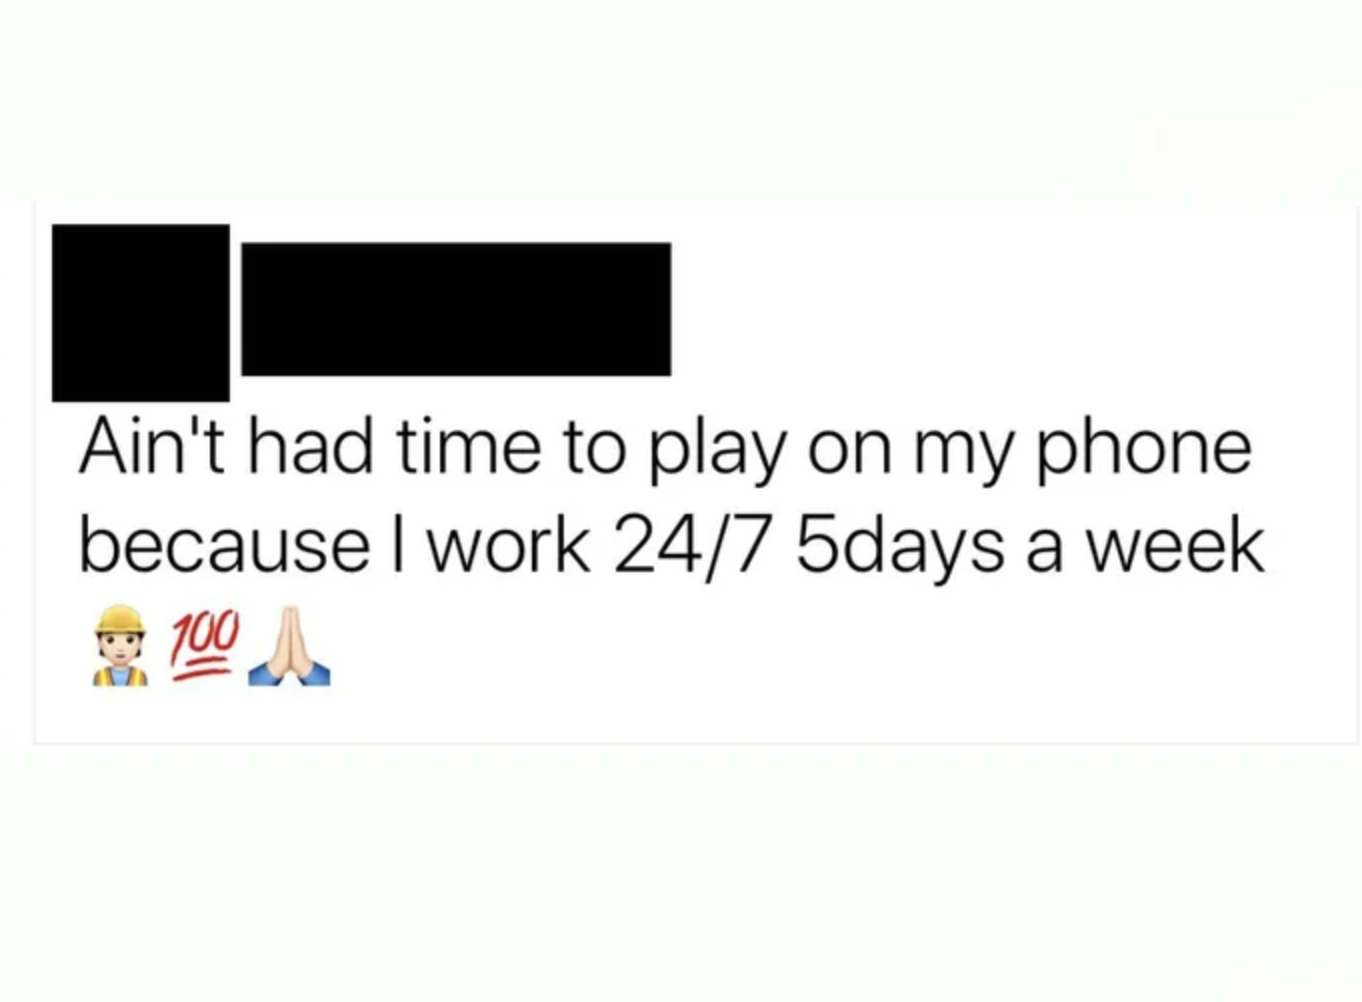 facebook post reading aint had time to play on my phone because i work 24/7 5 days a week